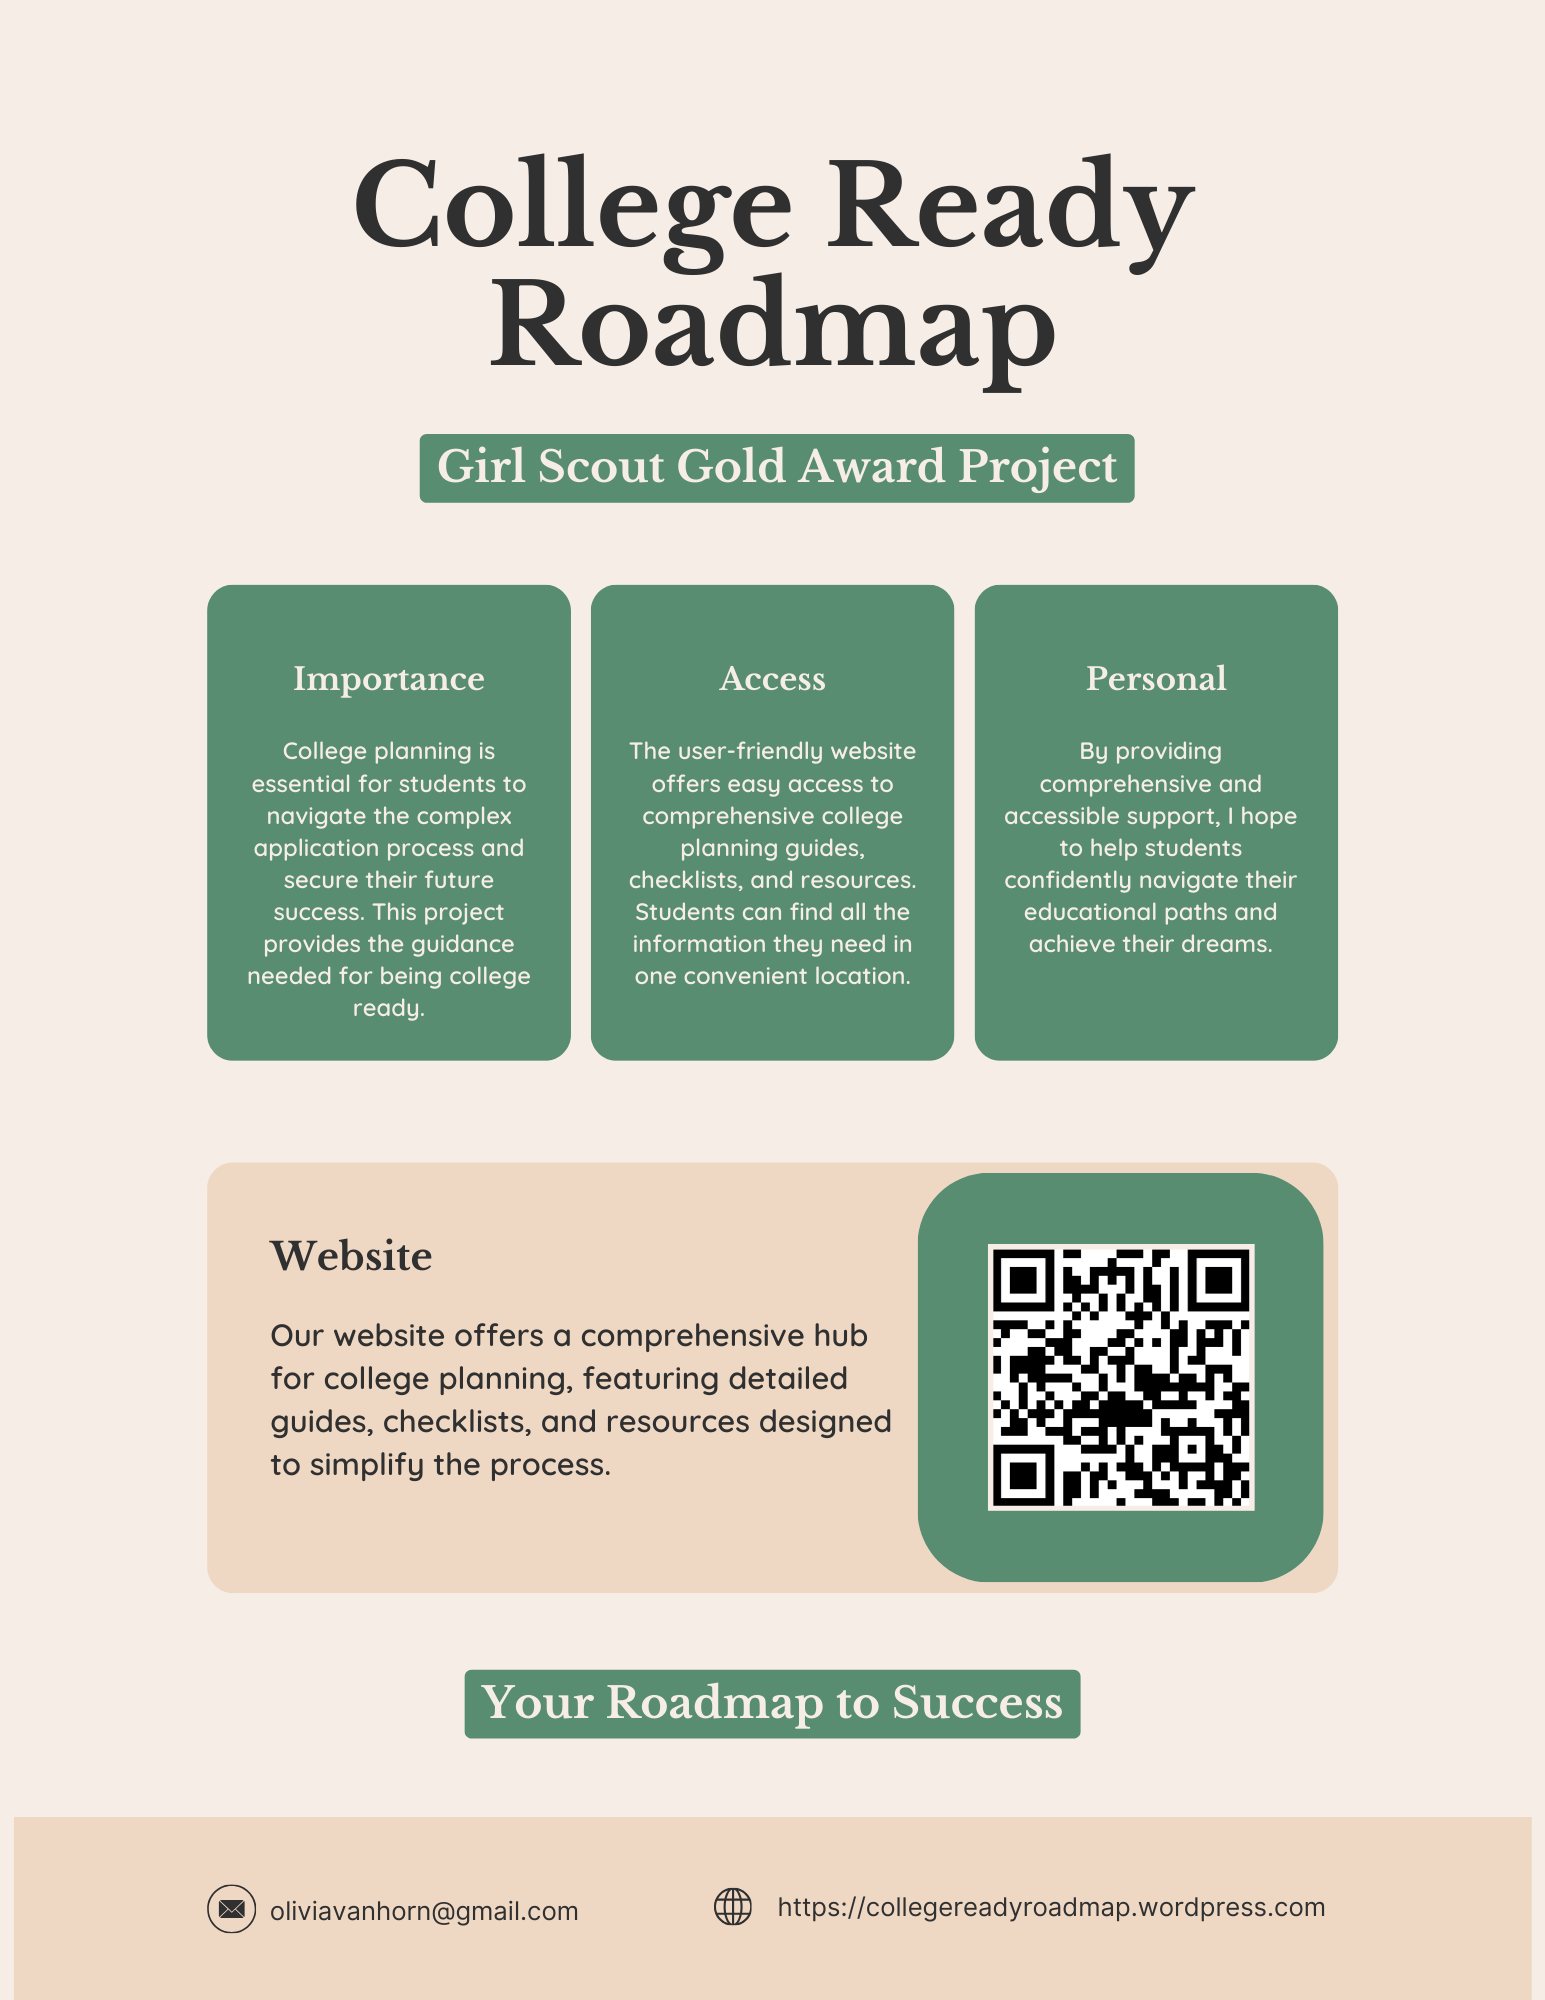 College Ready Roadmap Girl Scout gold award project